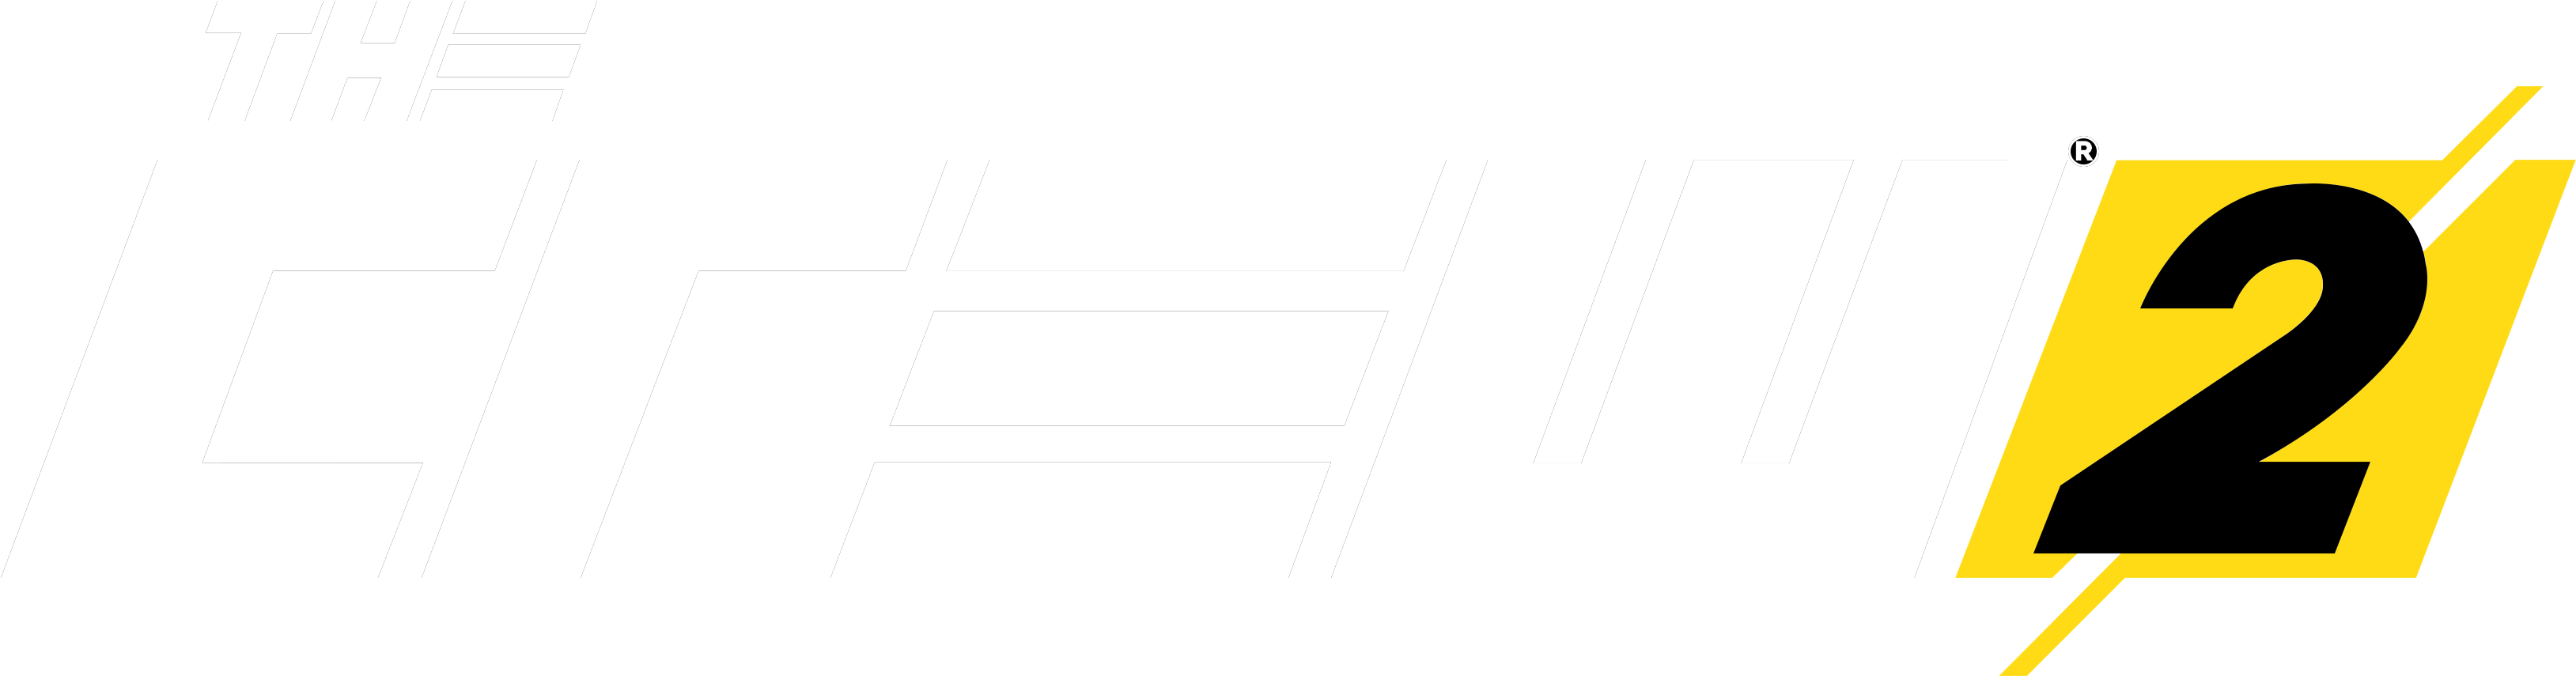 The Crew 2 Logo Png Image - Crew 2 Closed Beta Png (3489x1222), Png Download